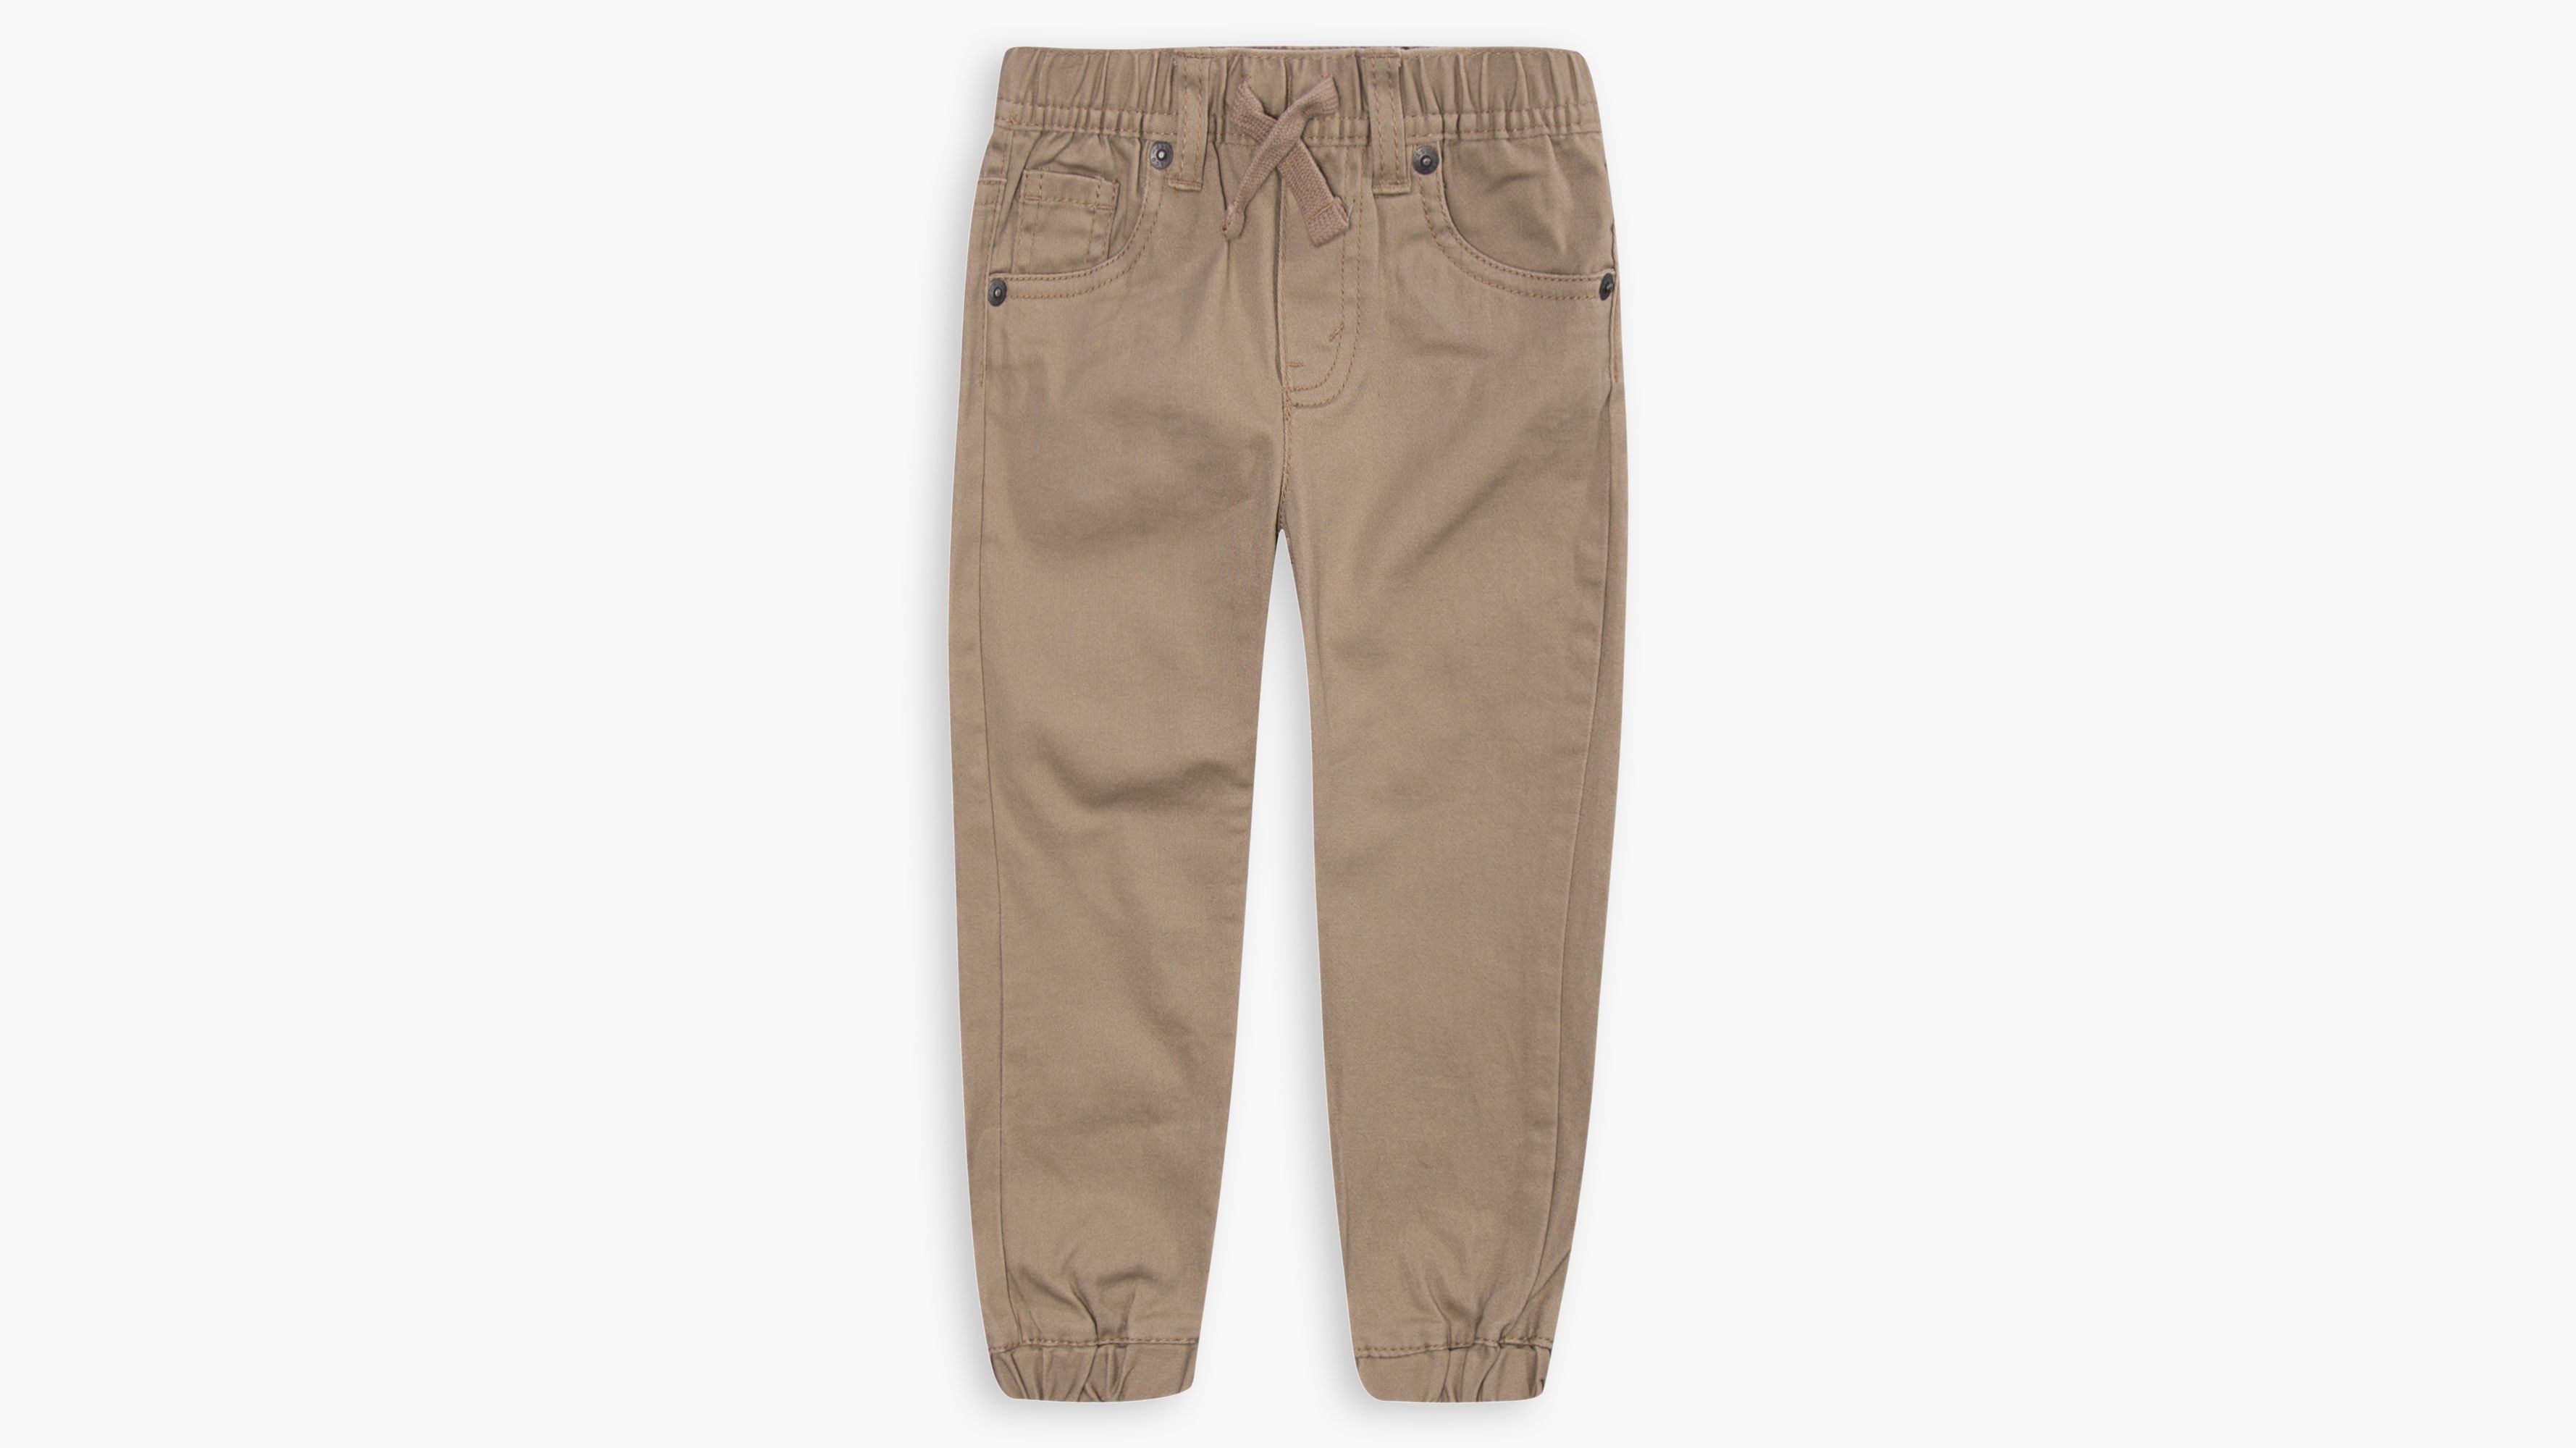 Twill Toddler Boys Joggers 2t-4t 